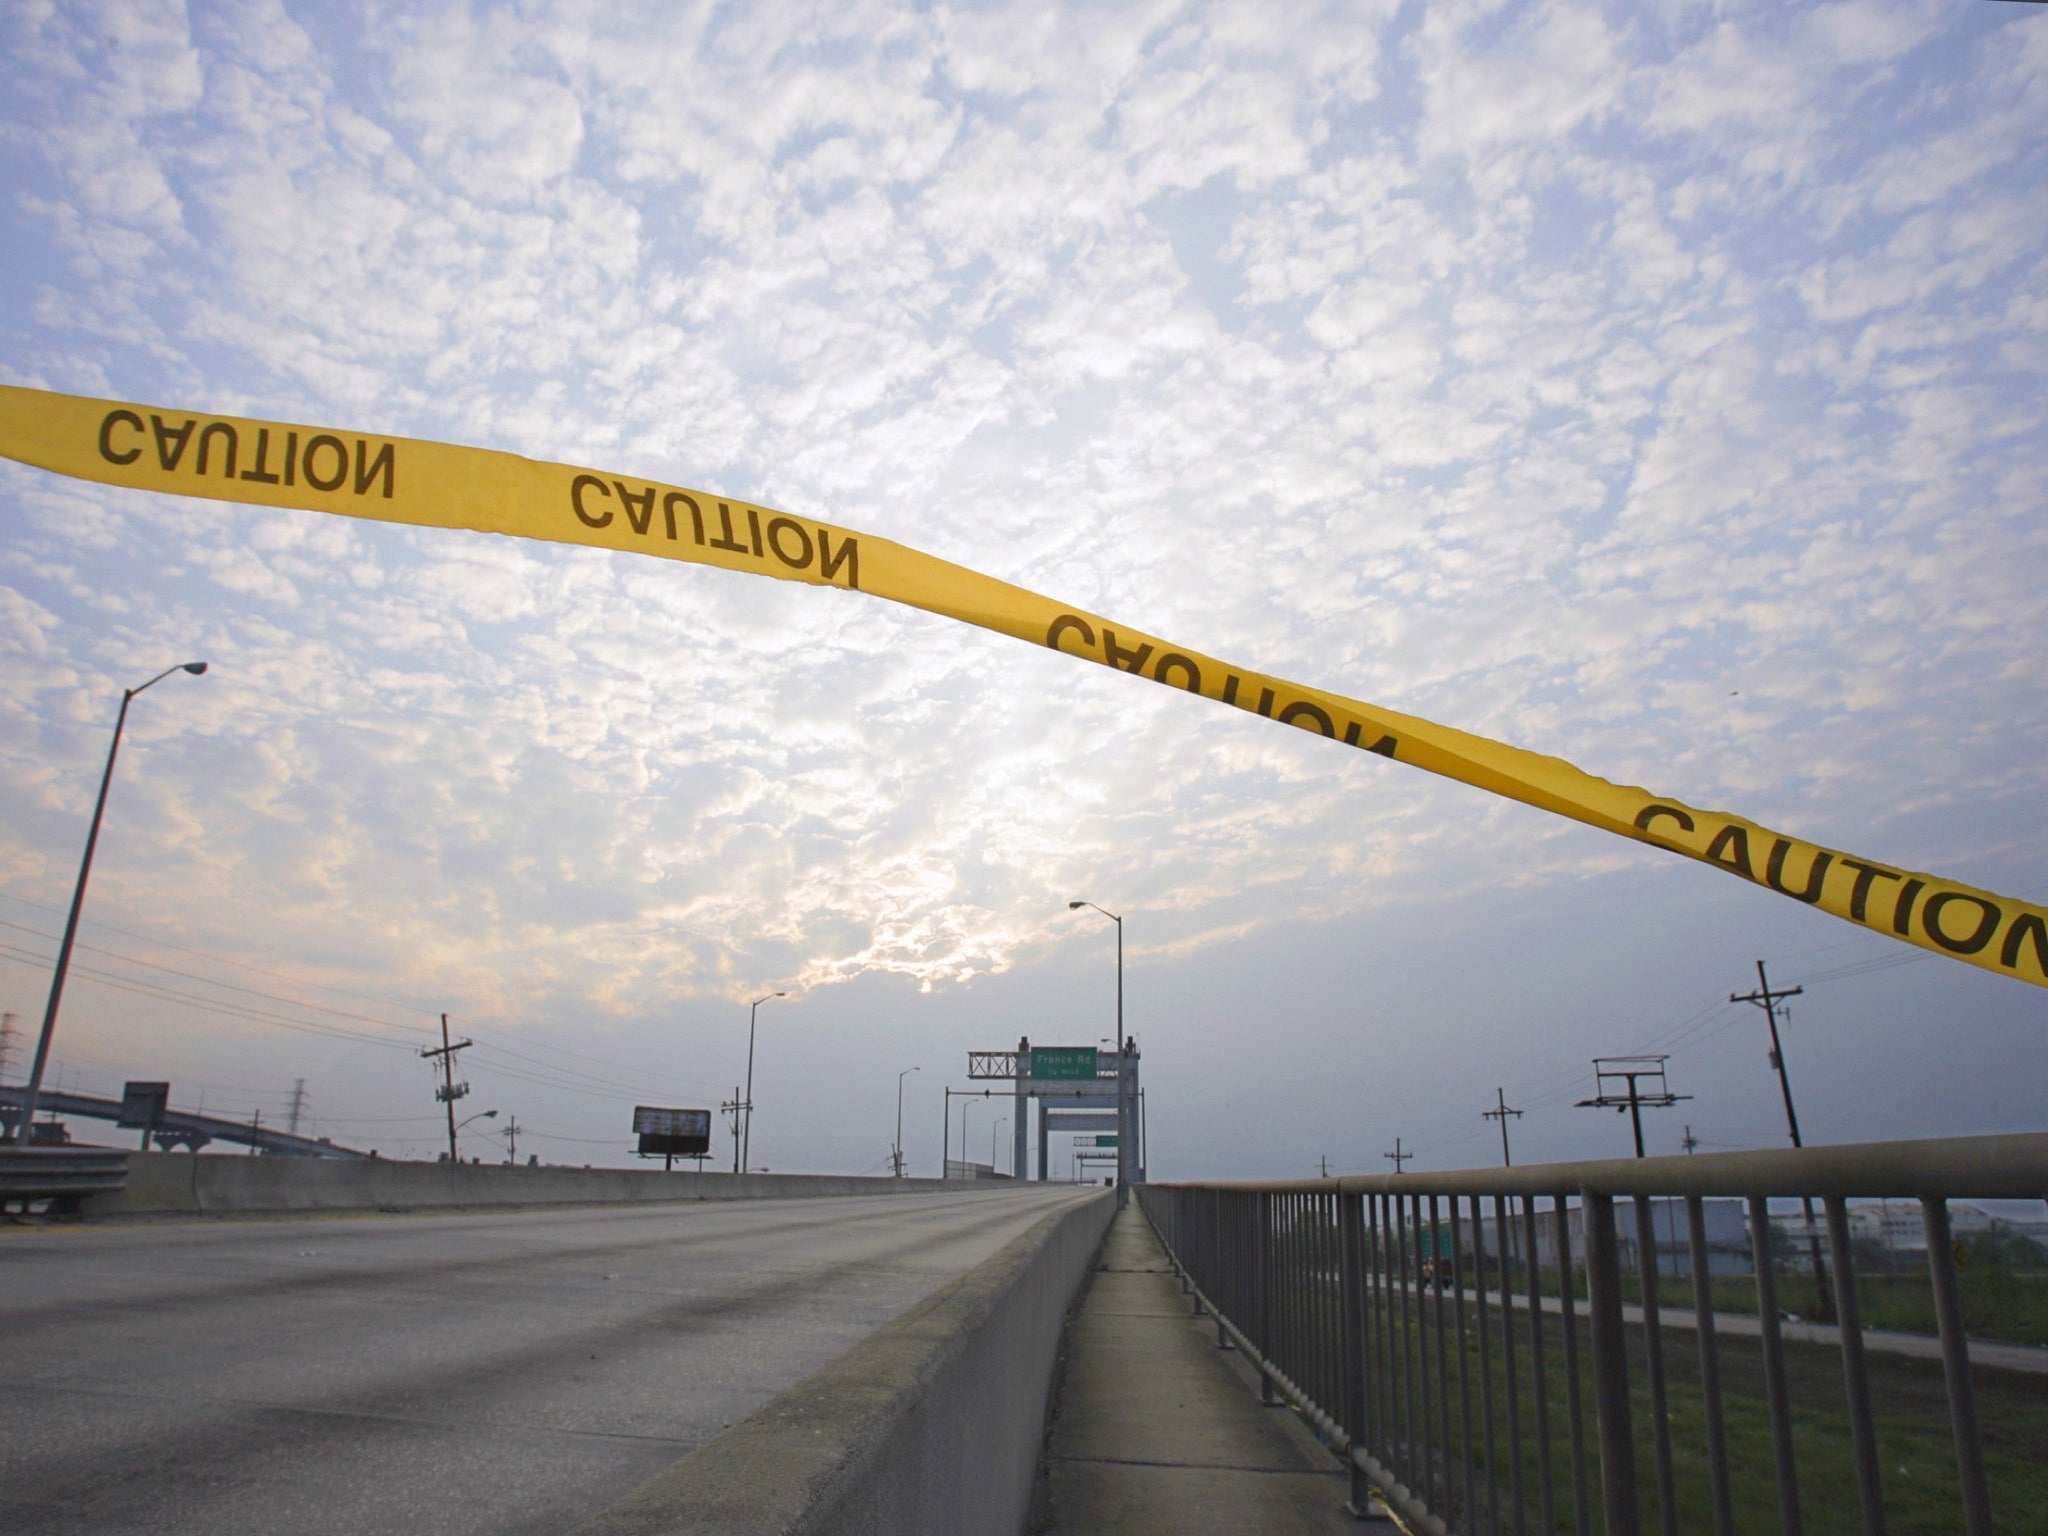 The shooting at Danziger bridge took place in the chaotic aftermath of Hurricane Katrina